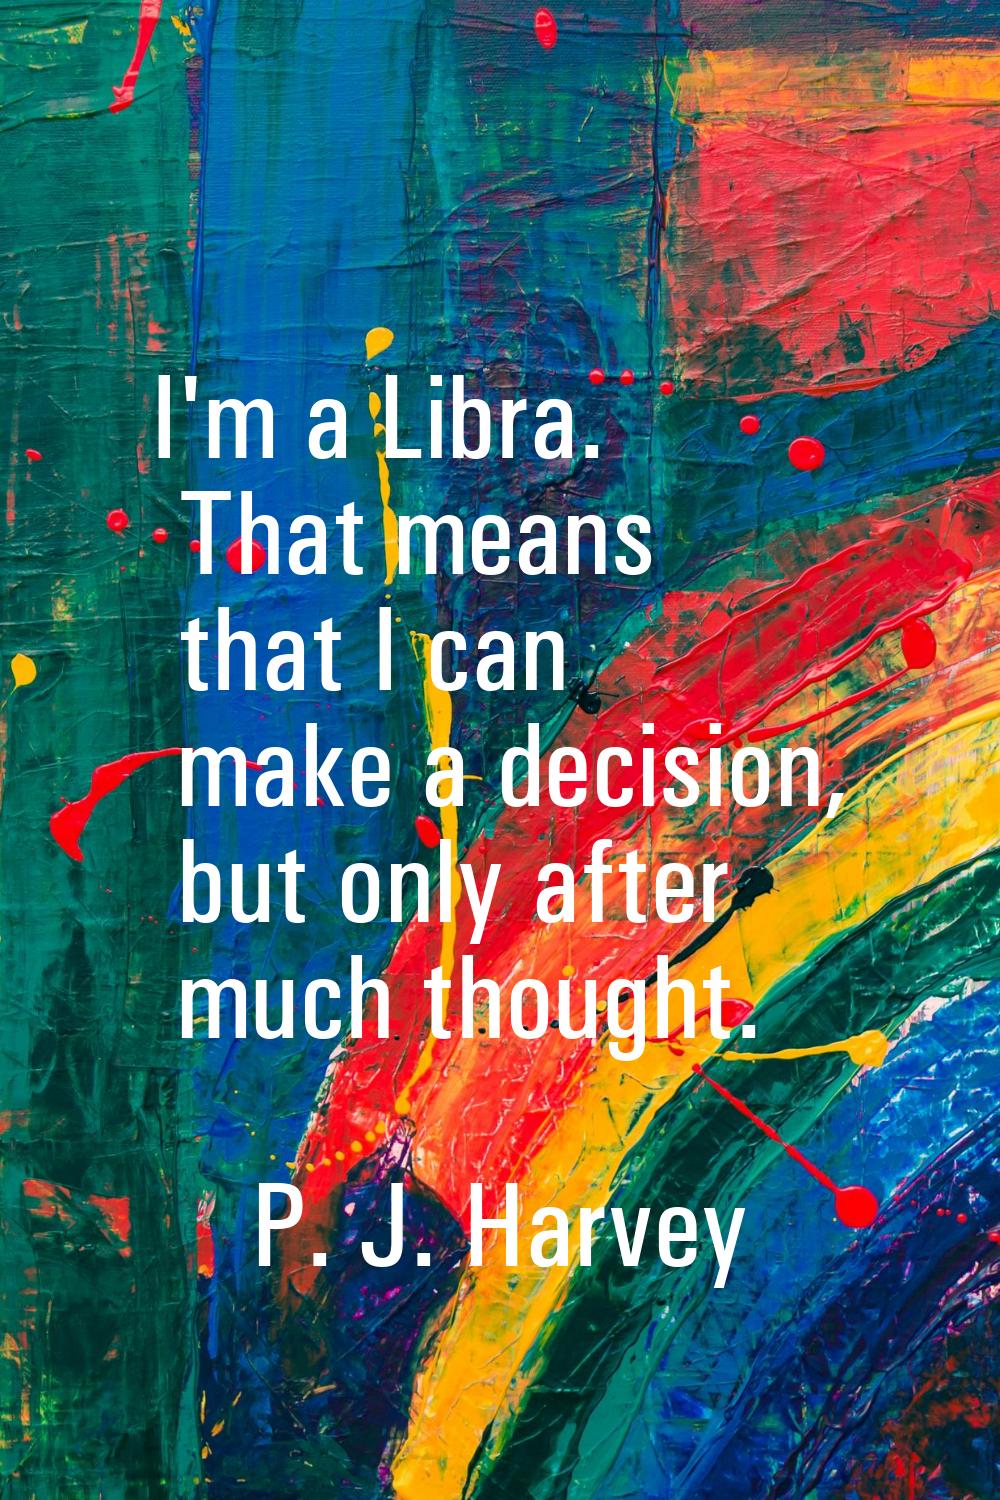 I'm a Libra. That means that I can make a decision, but only after much thought.